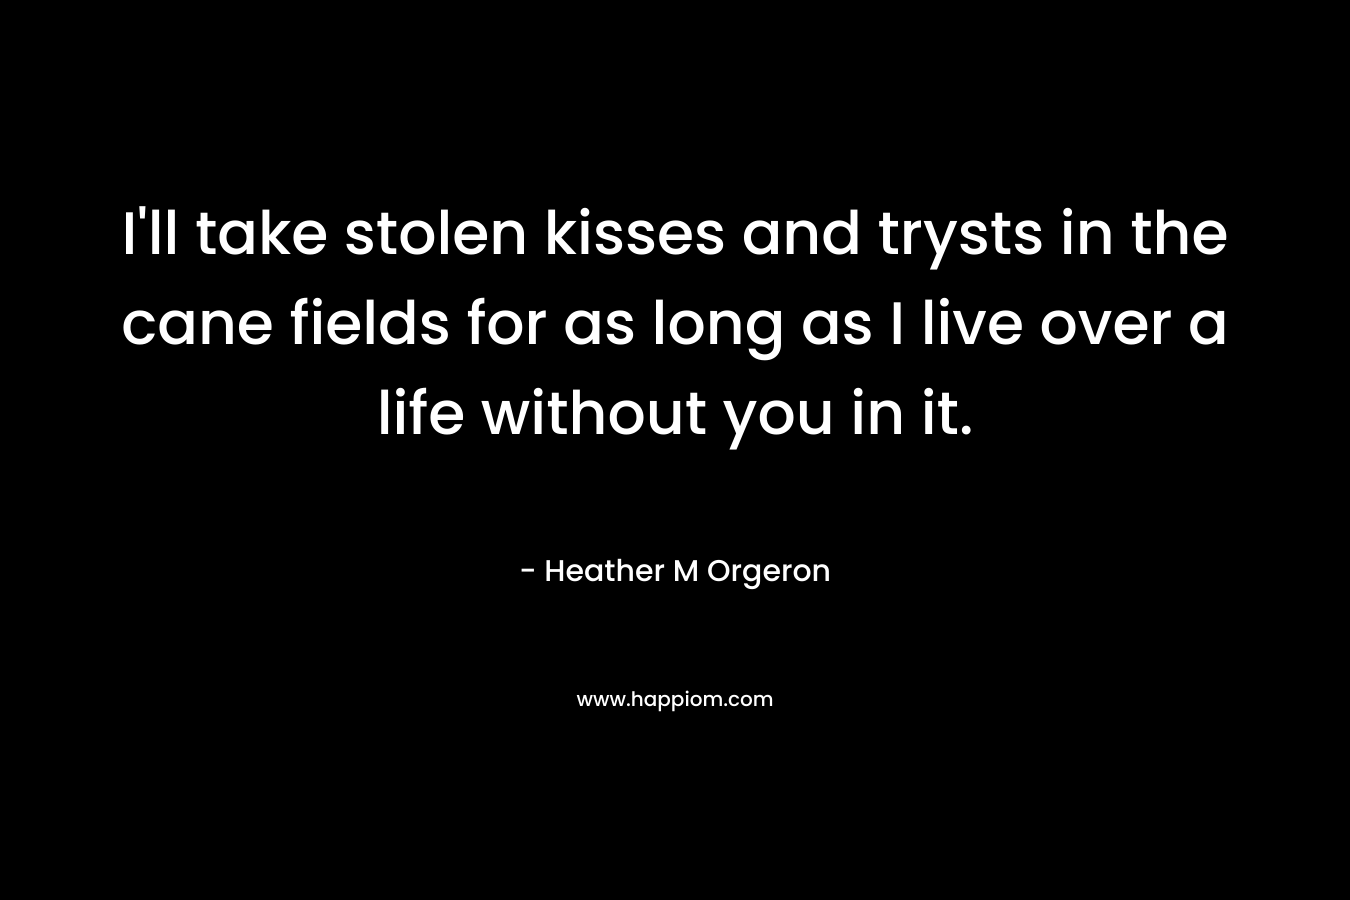 I’ll take stolen kisses and trysts in the cane fields for as long as I live over a life without you in it. – Heather M Orgeron